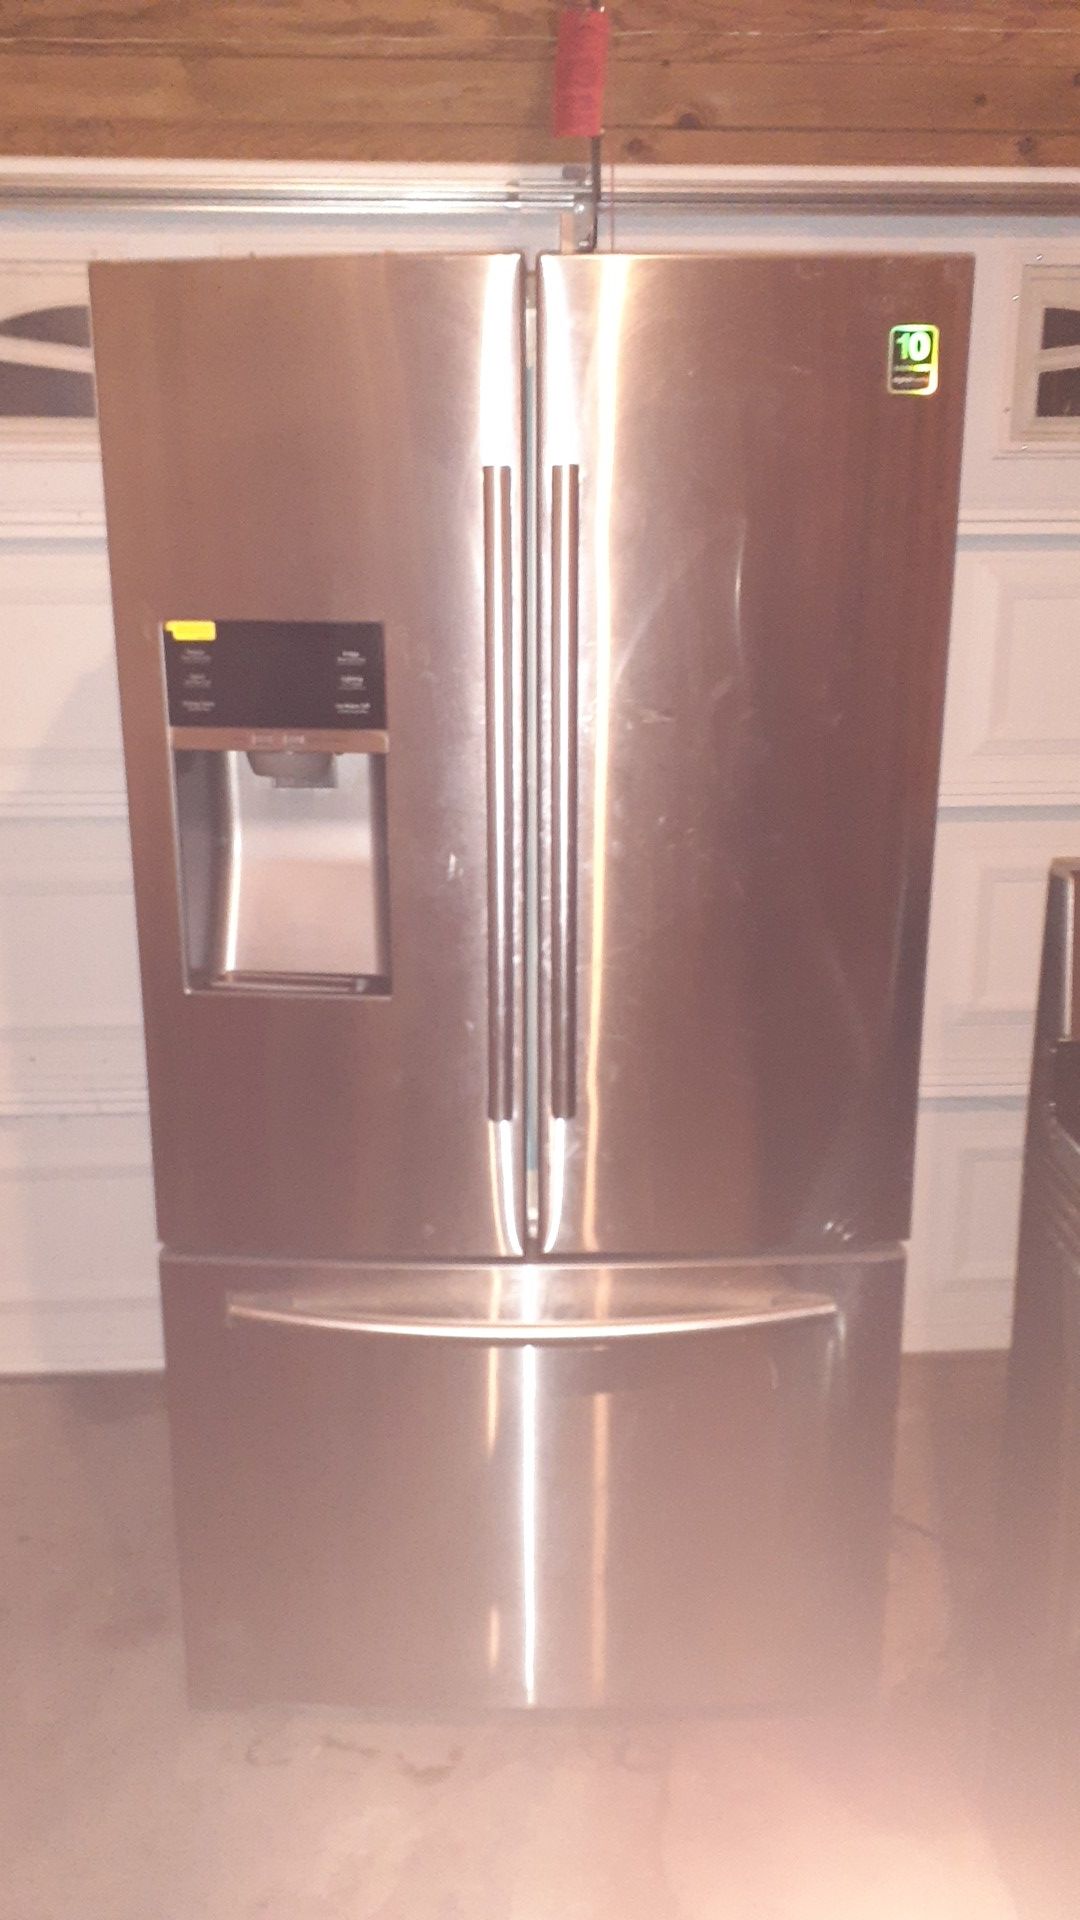 Matching Samsung Whirlpool stove and refrigerator as is.